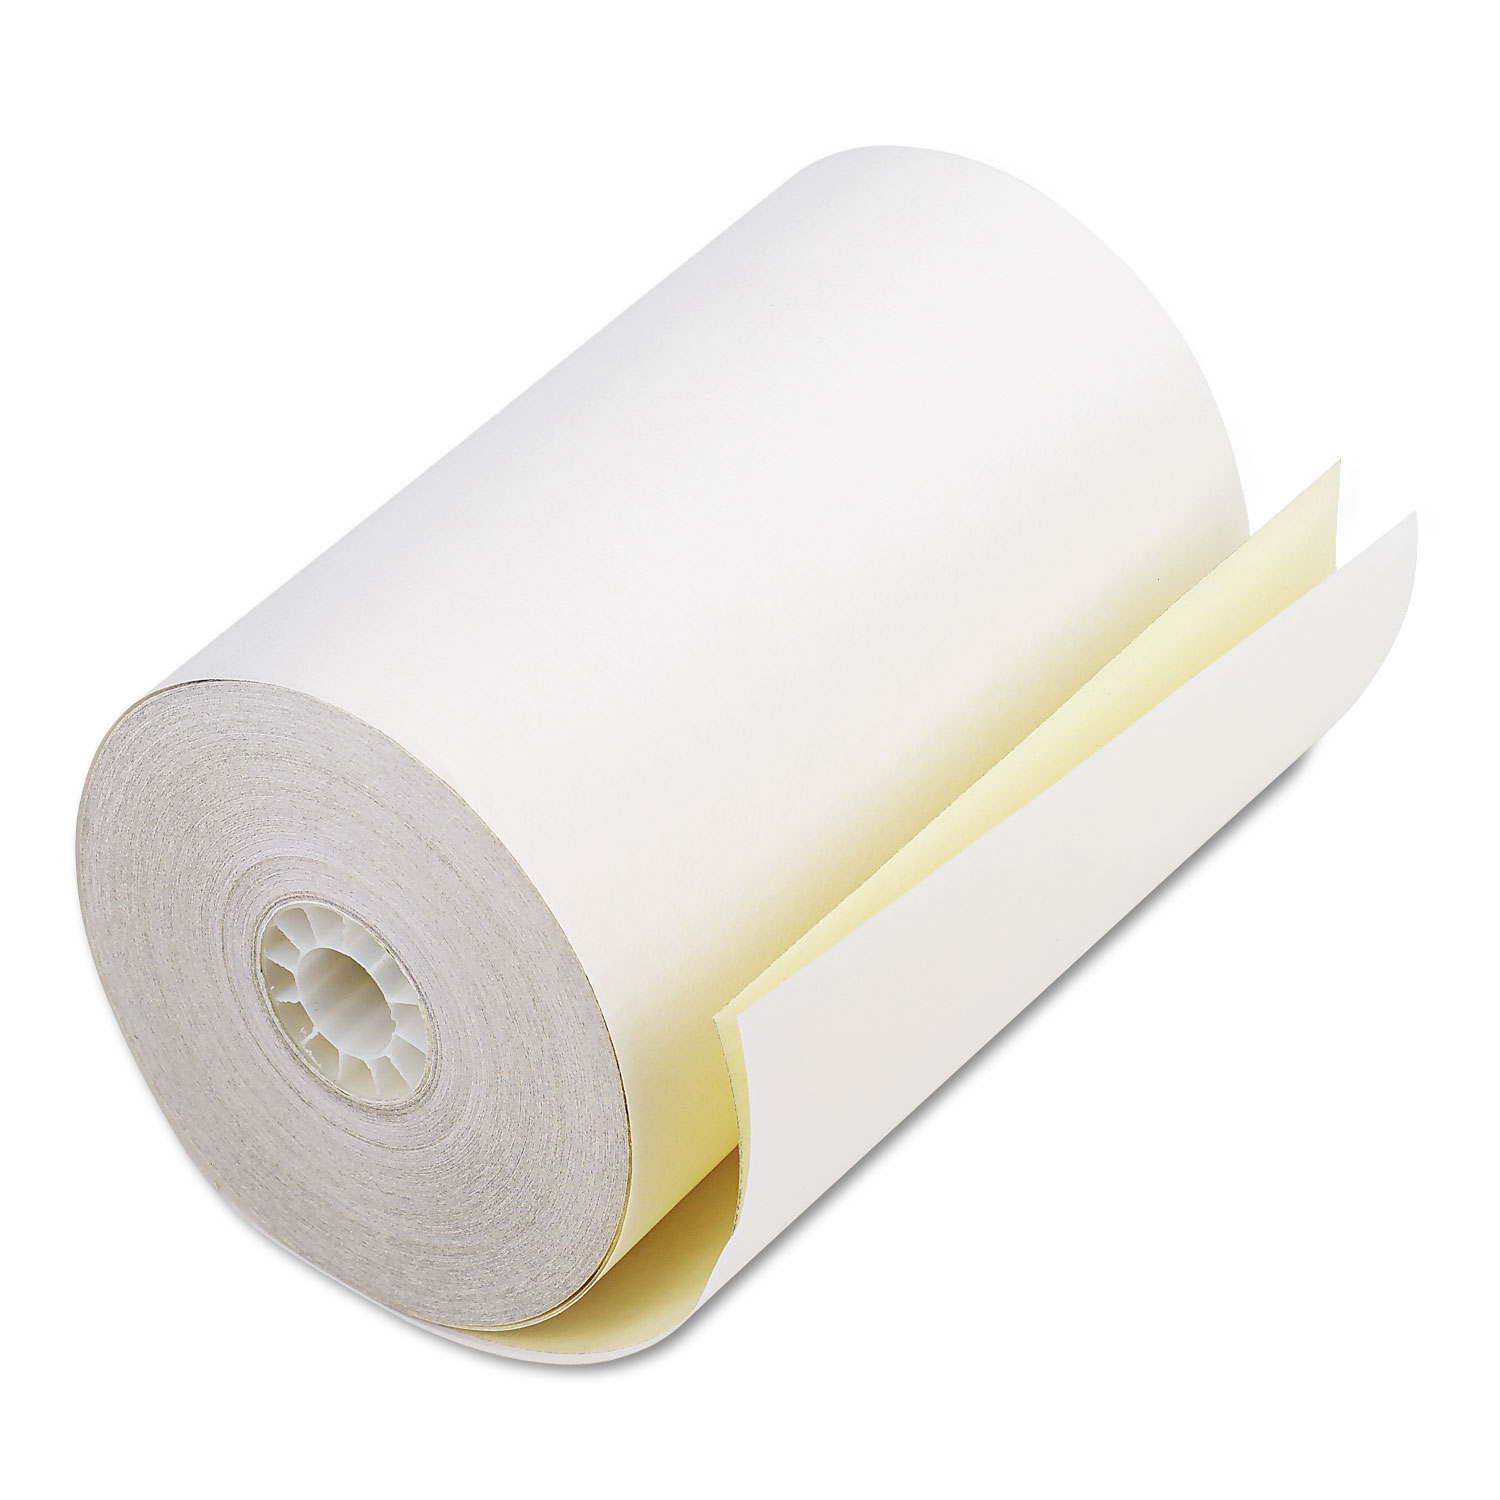  Iconex 8785 Impact Printing Carbonless Paper Rolls, 4.5 x 90 ft, White/Canary, 24/Carton (ICX90770469) 